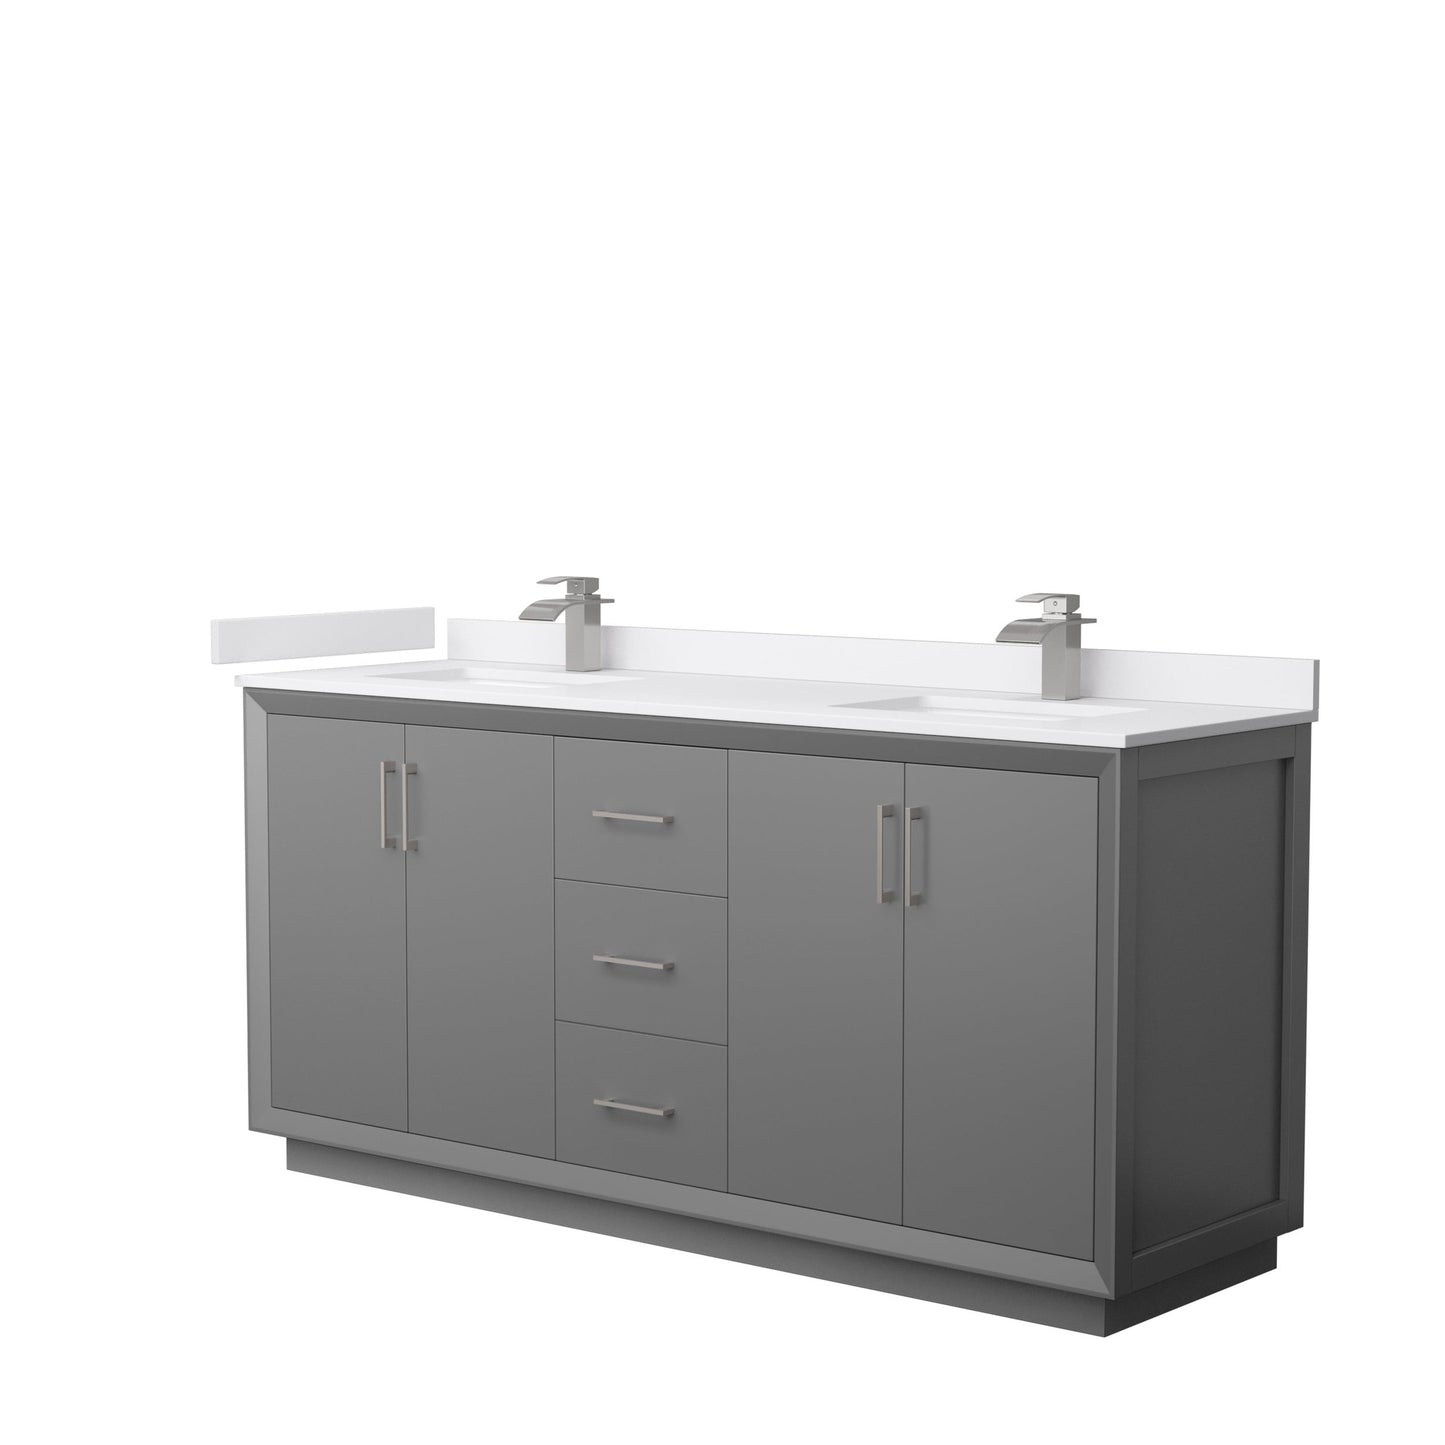 Wyndham Collection Strada 72" Double Bathroom Vanity in Dark Gray, White Cultured Marble Countertop, Undermount Square Sink, Brushed Nickel Trim